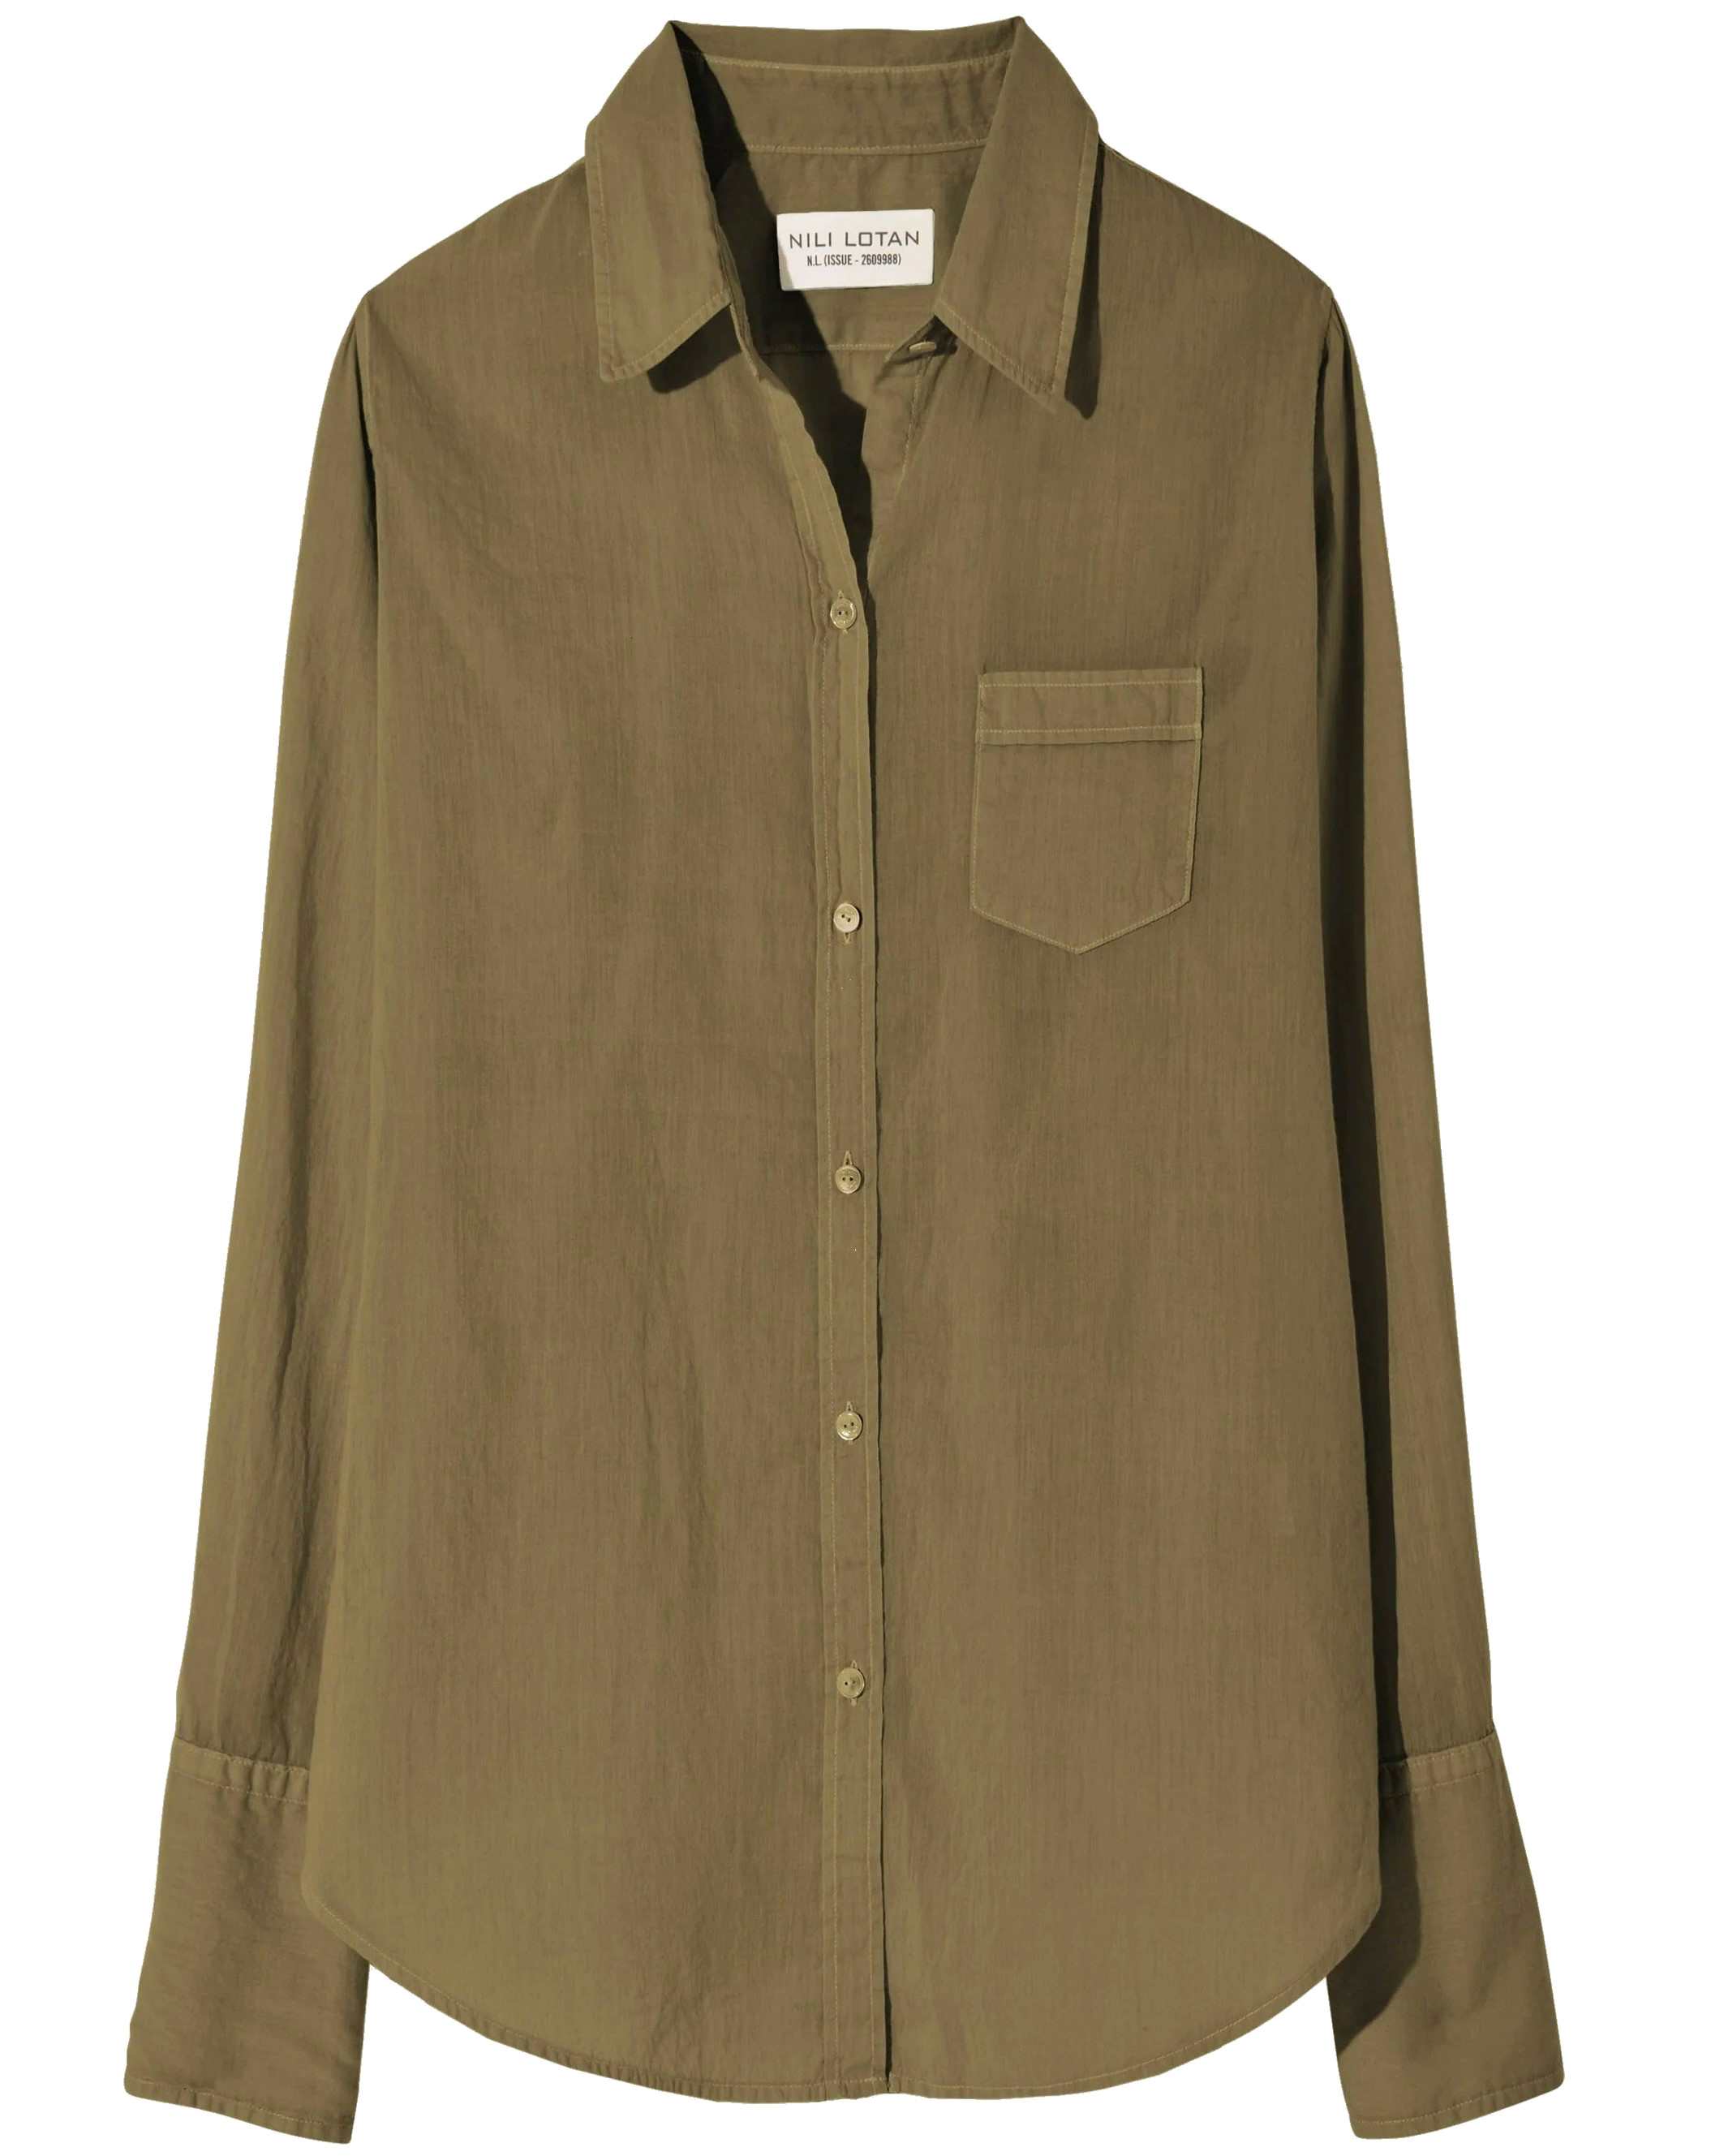 NILI LOTAN Cotton Voile NL Shirt in Olive Green L